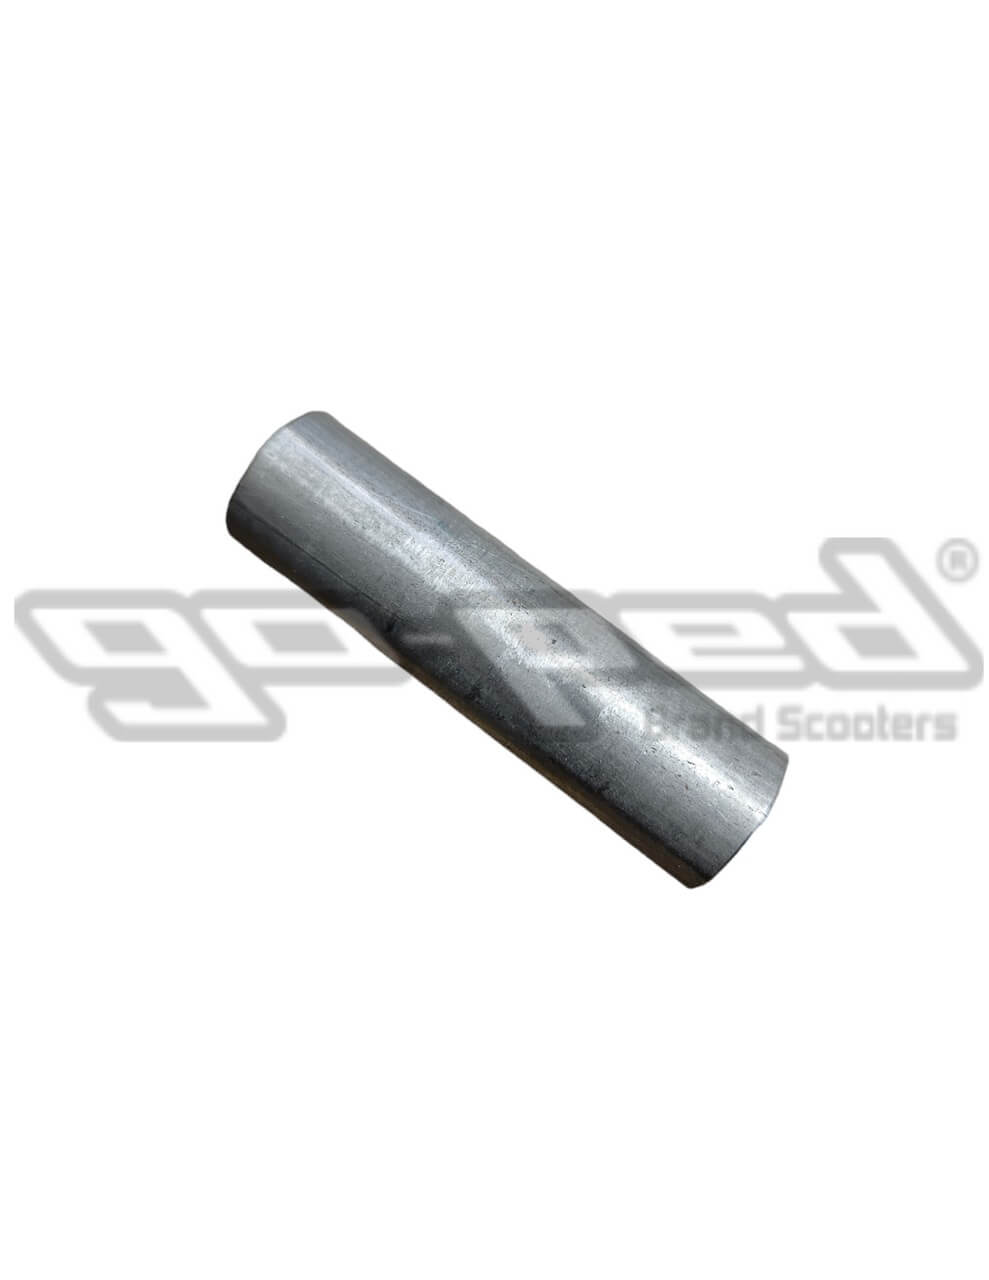 Go-Ped Replacement DRIVE SPINDLE NO GRIT (S1013) for Go-Karts, Scooters